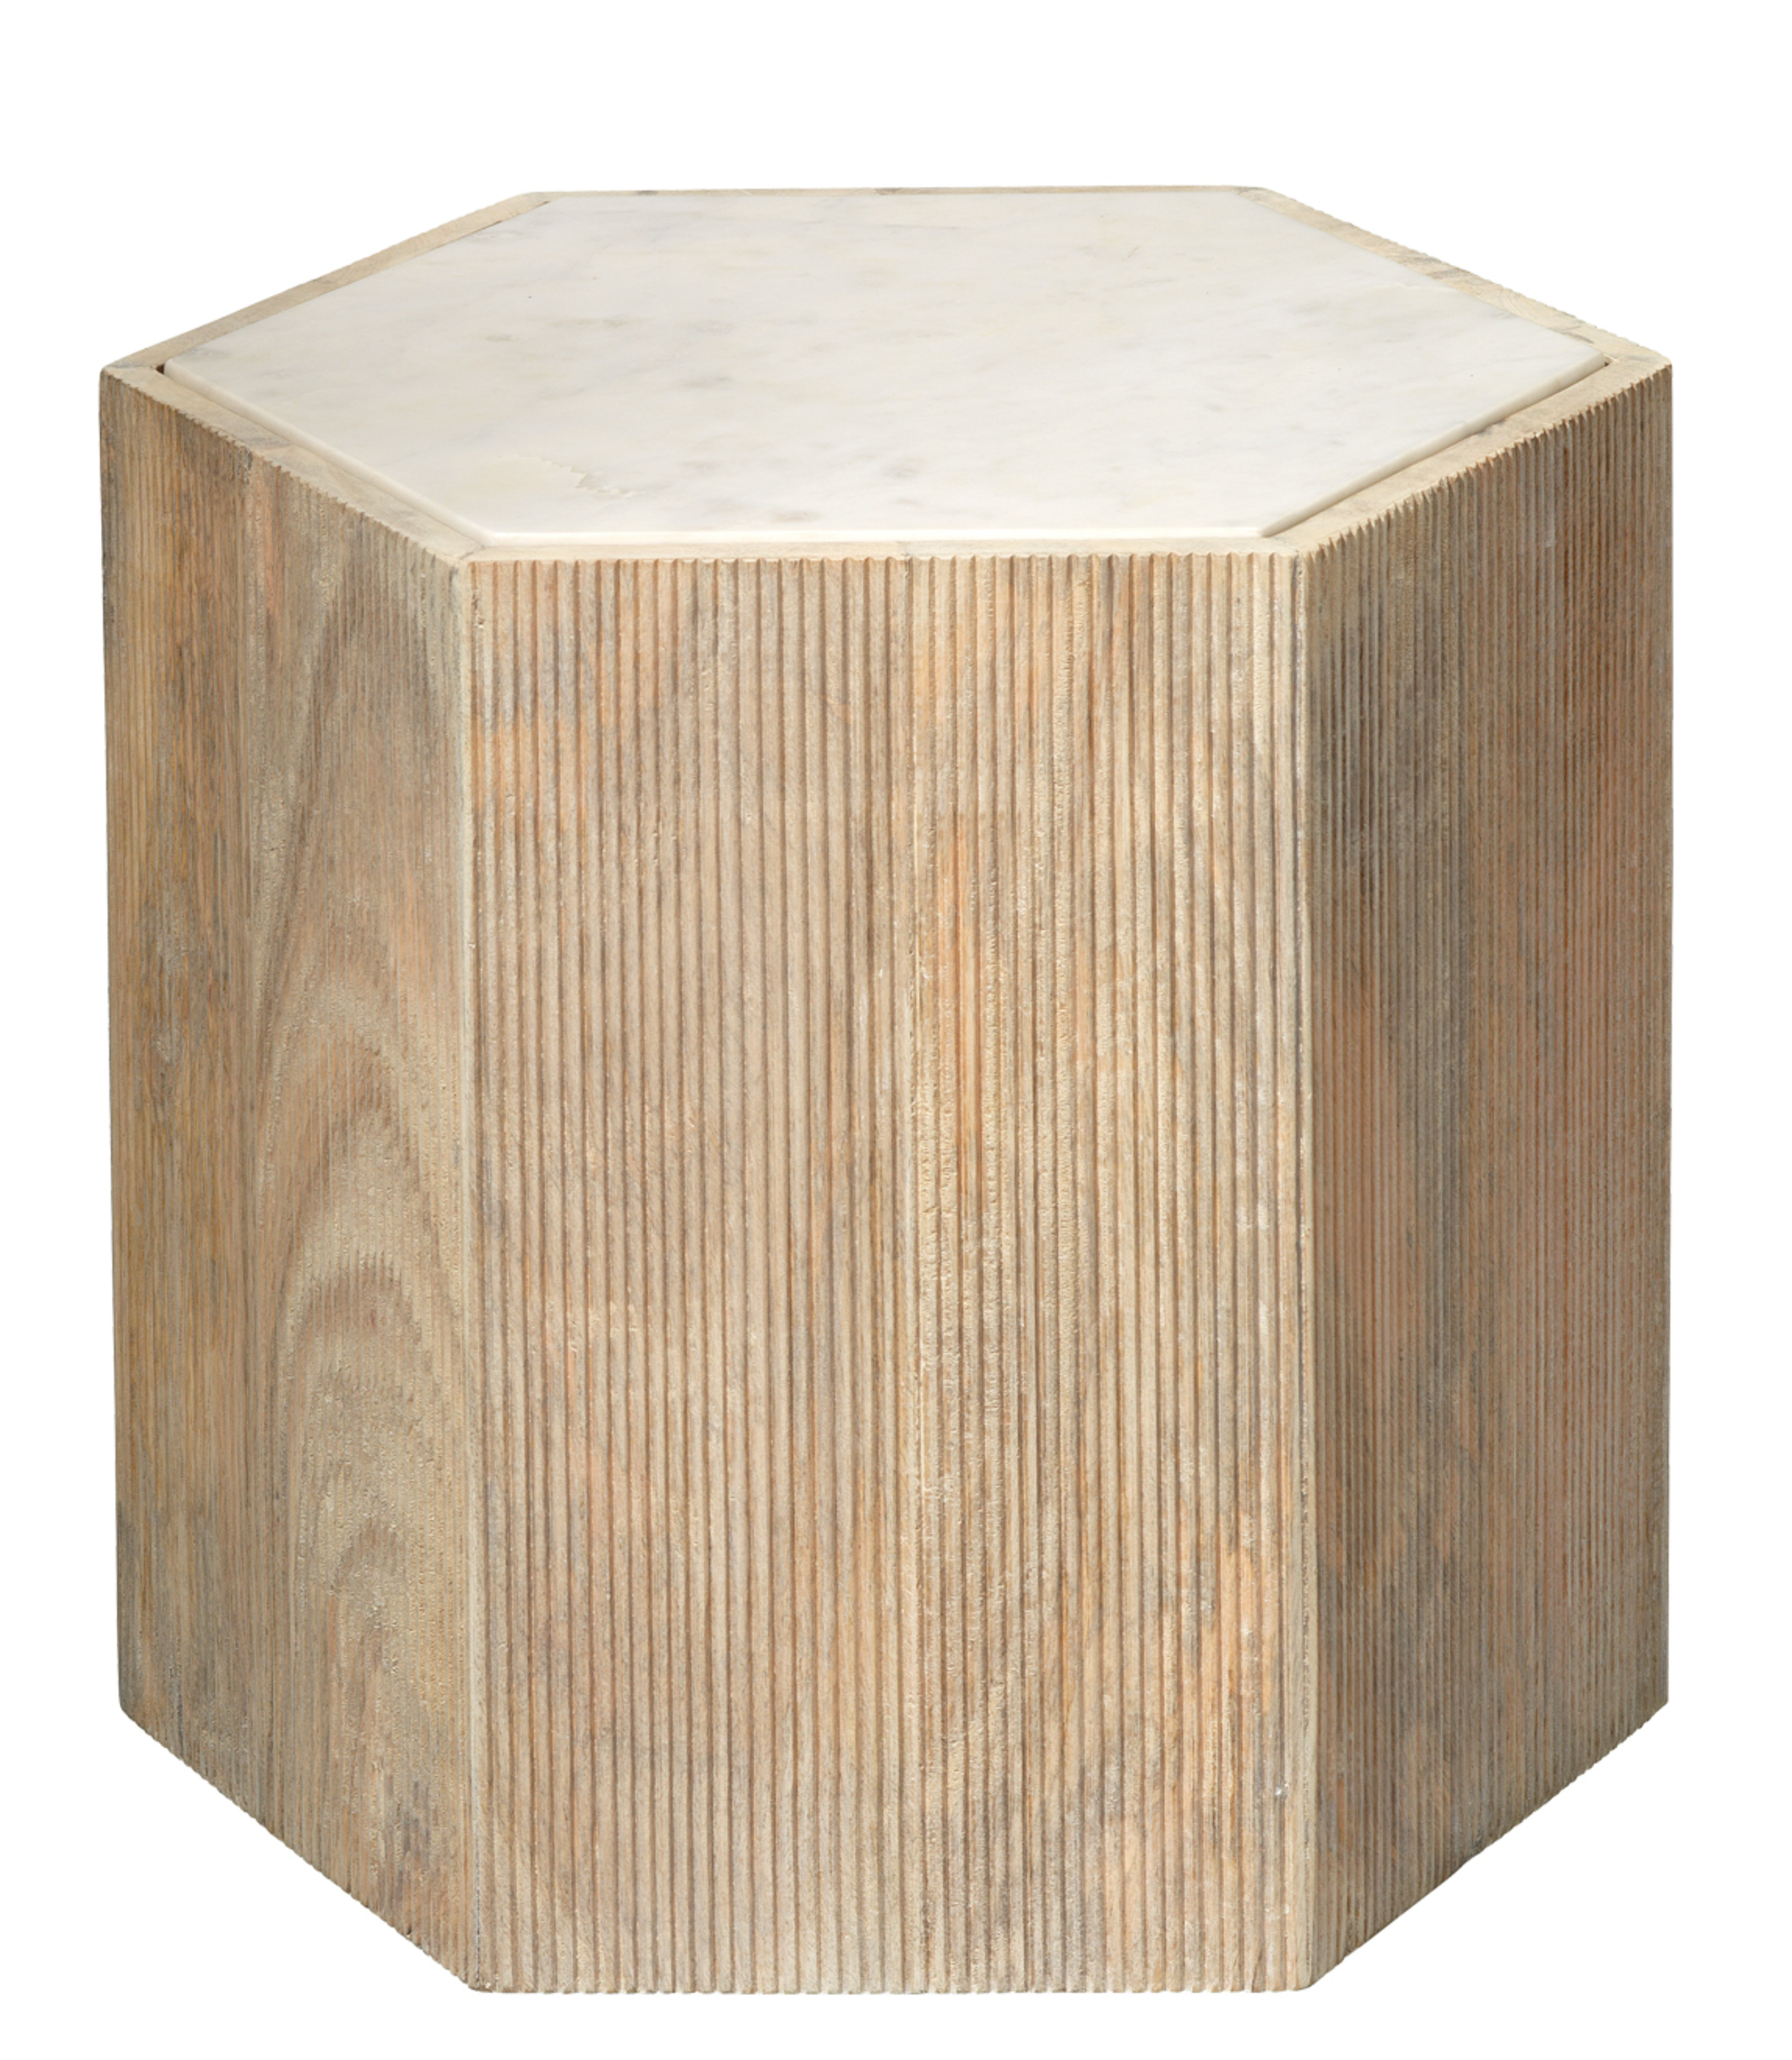 Large Tiney Hexagon Table in Natural Wood & White Marble Joss & Main Size: 14 H x 20 W x 17 D